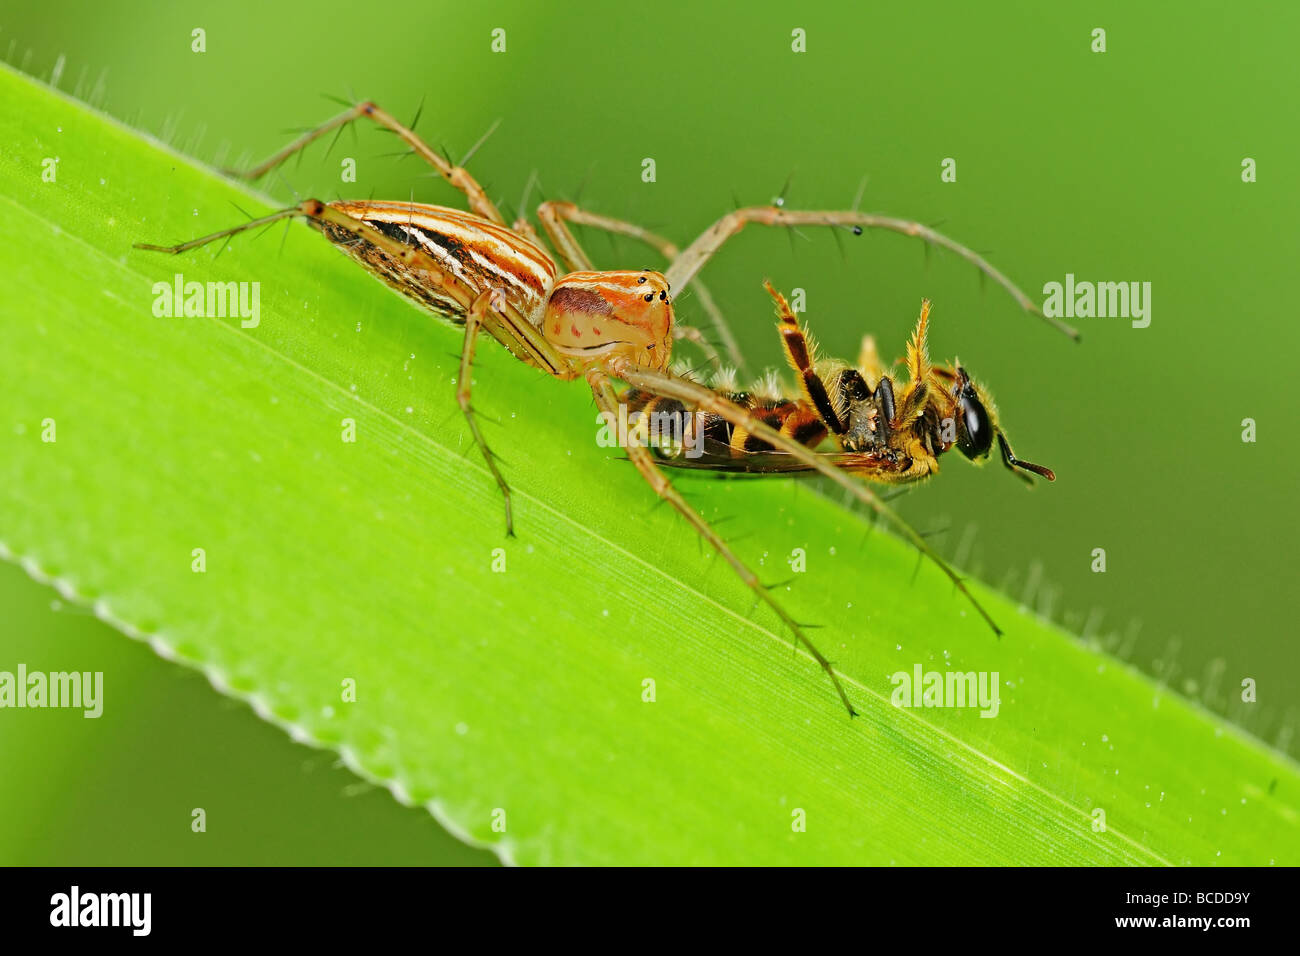 lynx spider eating a bee Stock Photo